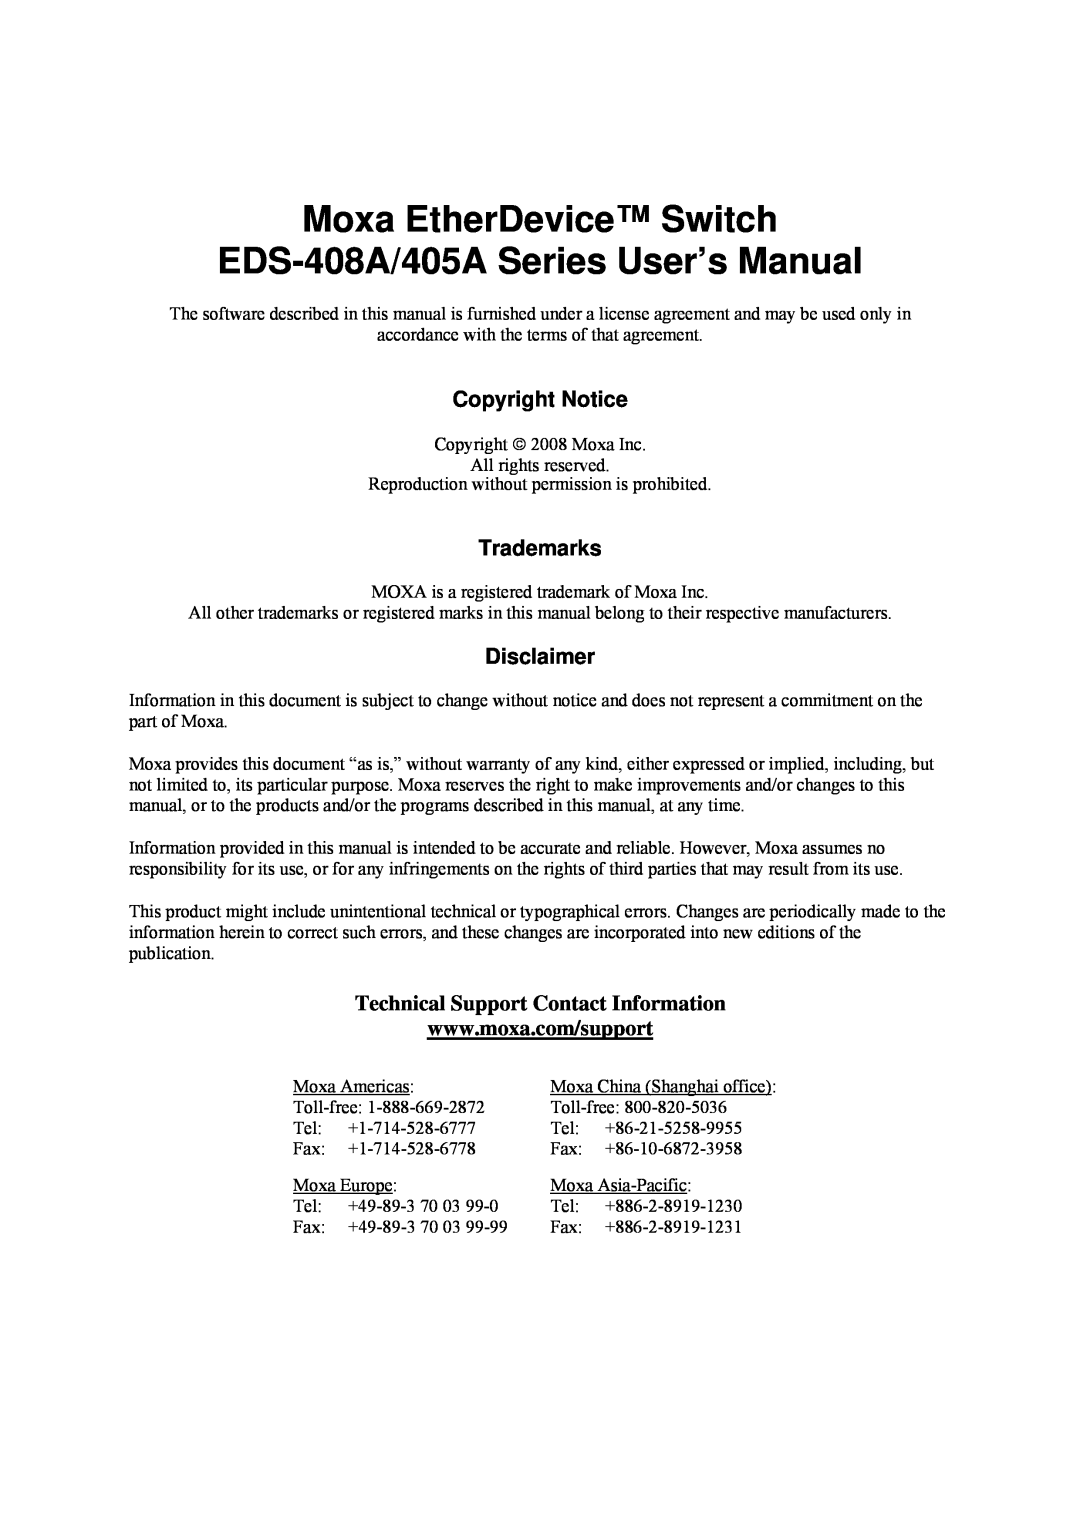 Moxa Technologies EDS-408A, EDS-405A Copyright Notice, Trademarks, Disclaimer, Technical Support Contact Information 